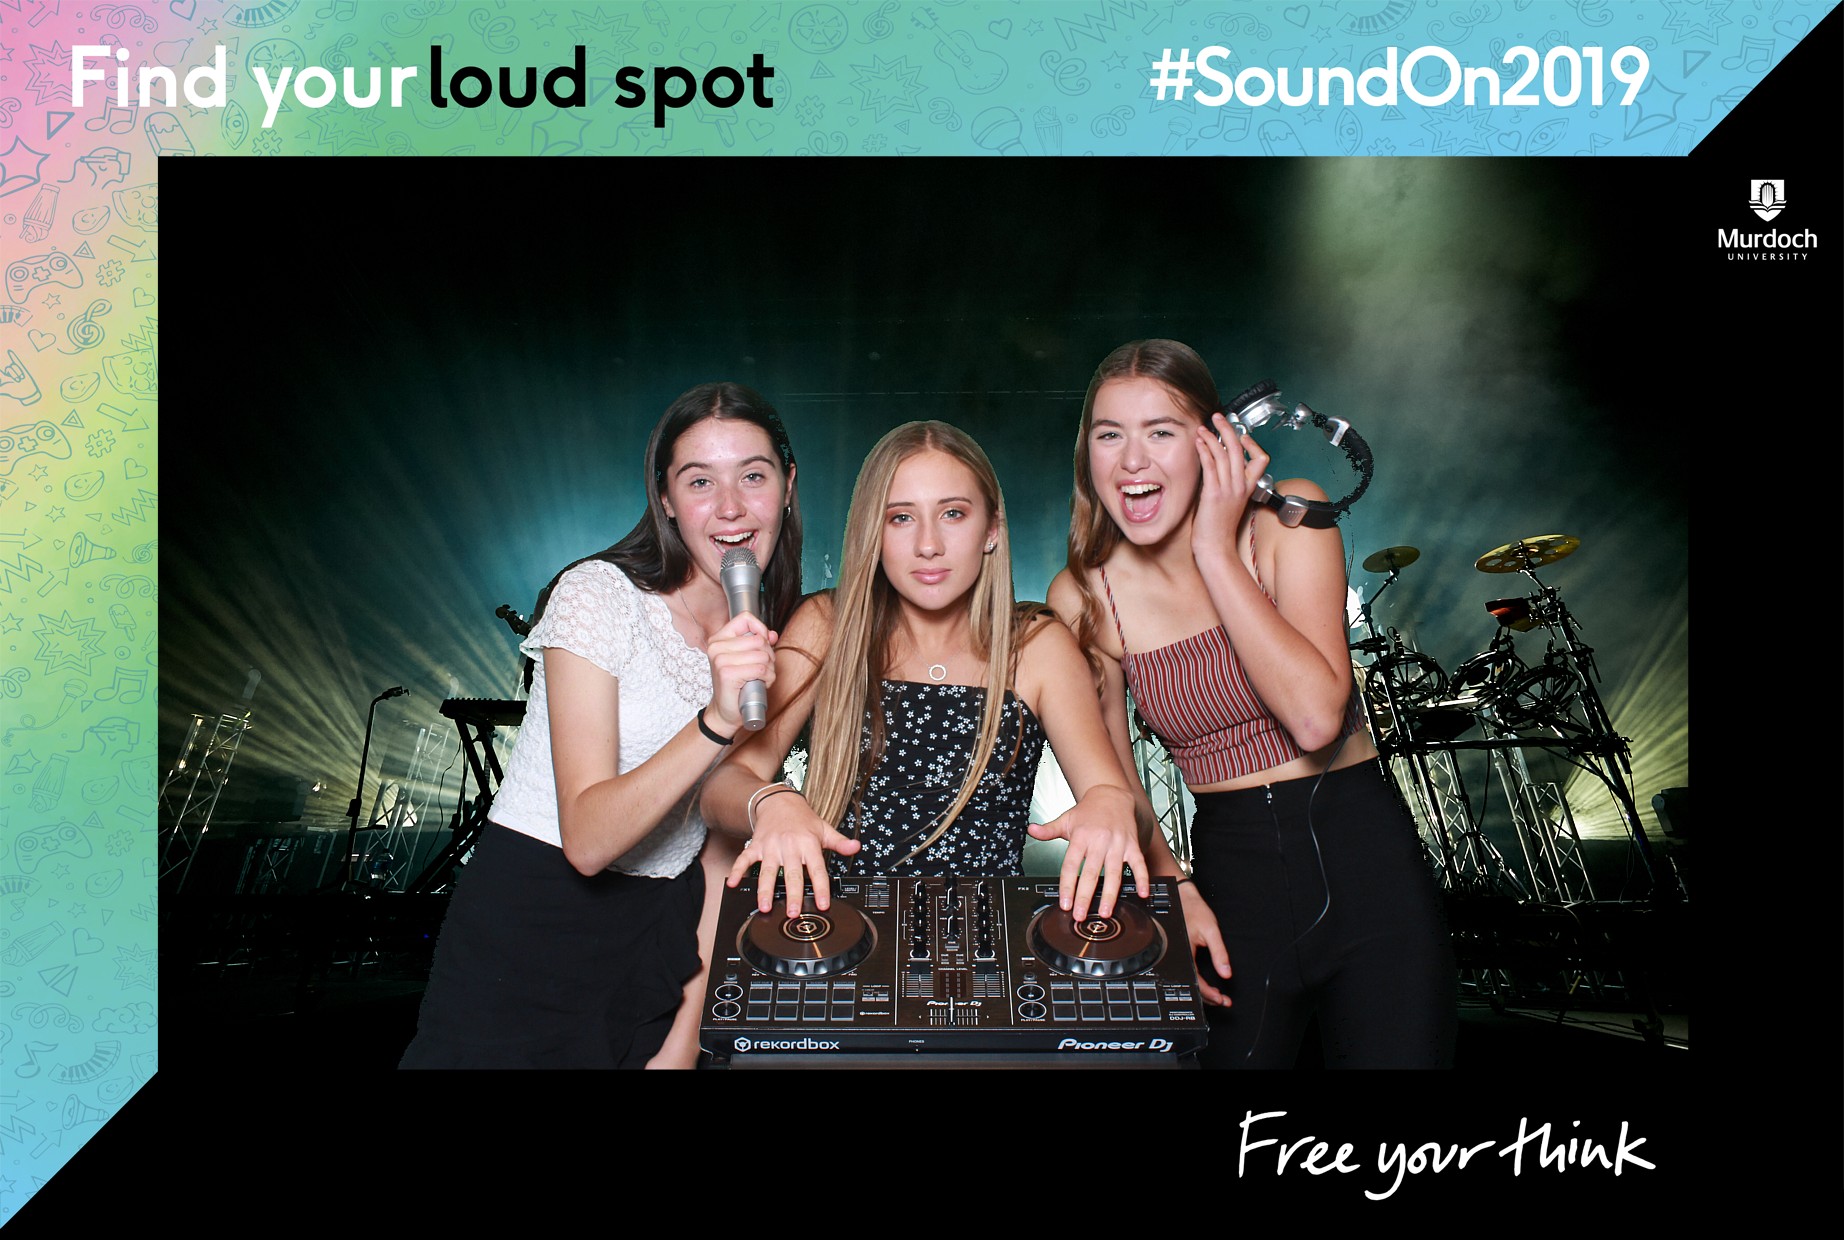 Green Screen Photo Booth - Sound On 2019